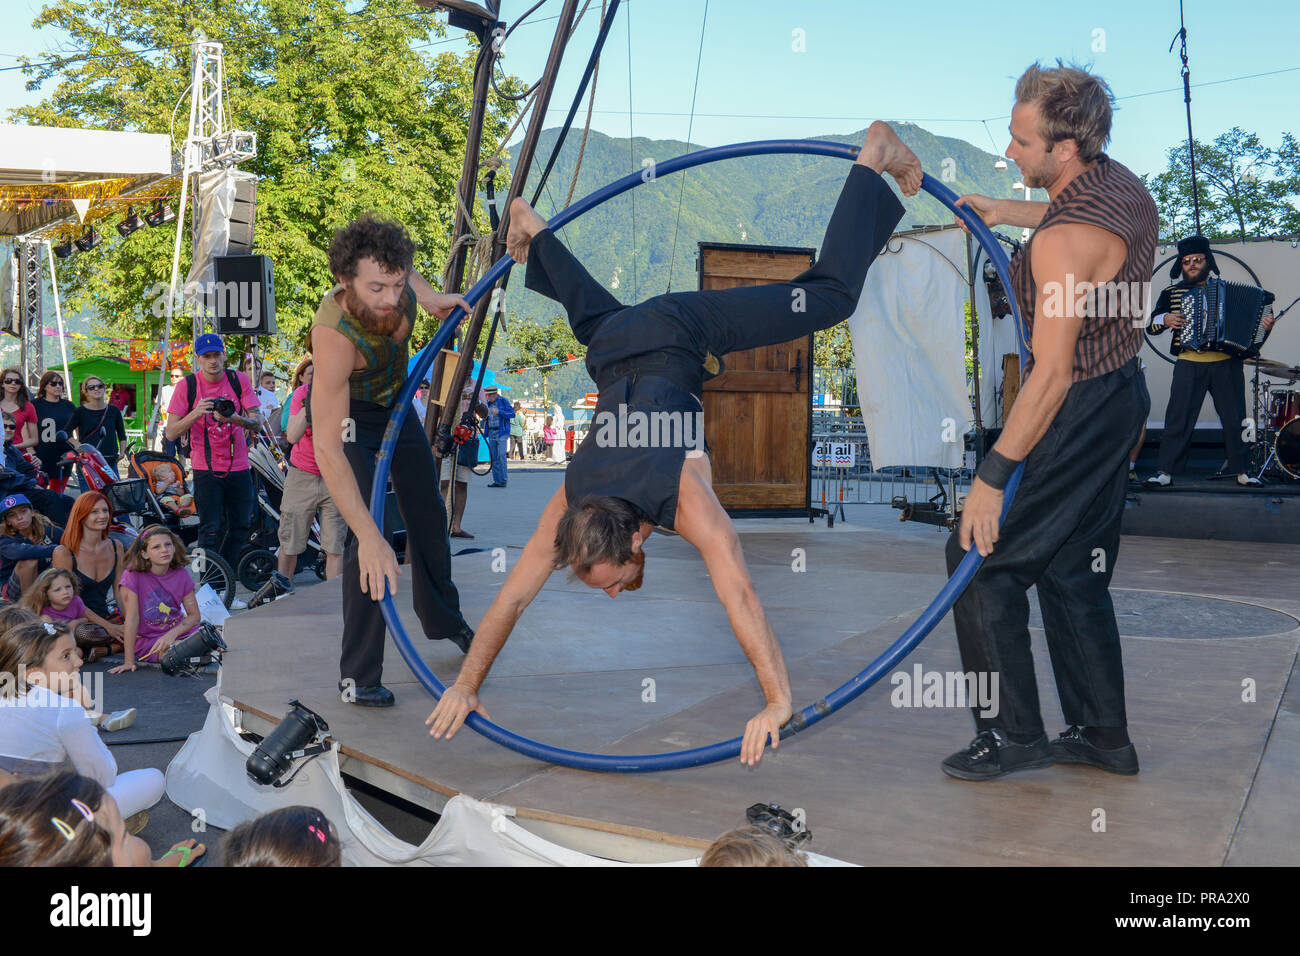 Lugano, Switzerland - 15 July 2016 - Acrobat on a hula hoop does tricks at  Buskers Festival in Lugano, Switzerland Stock Photo - Alamy